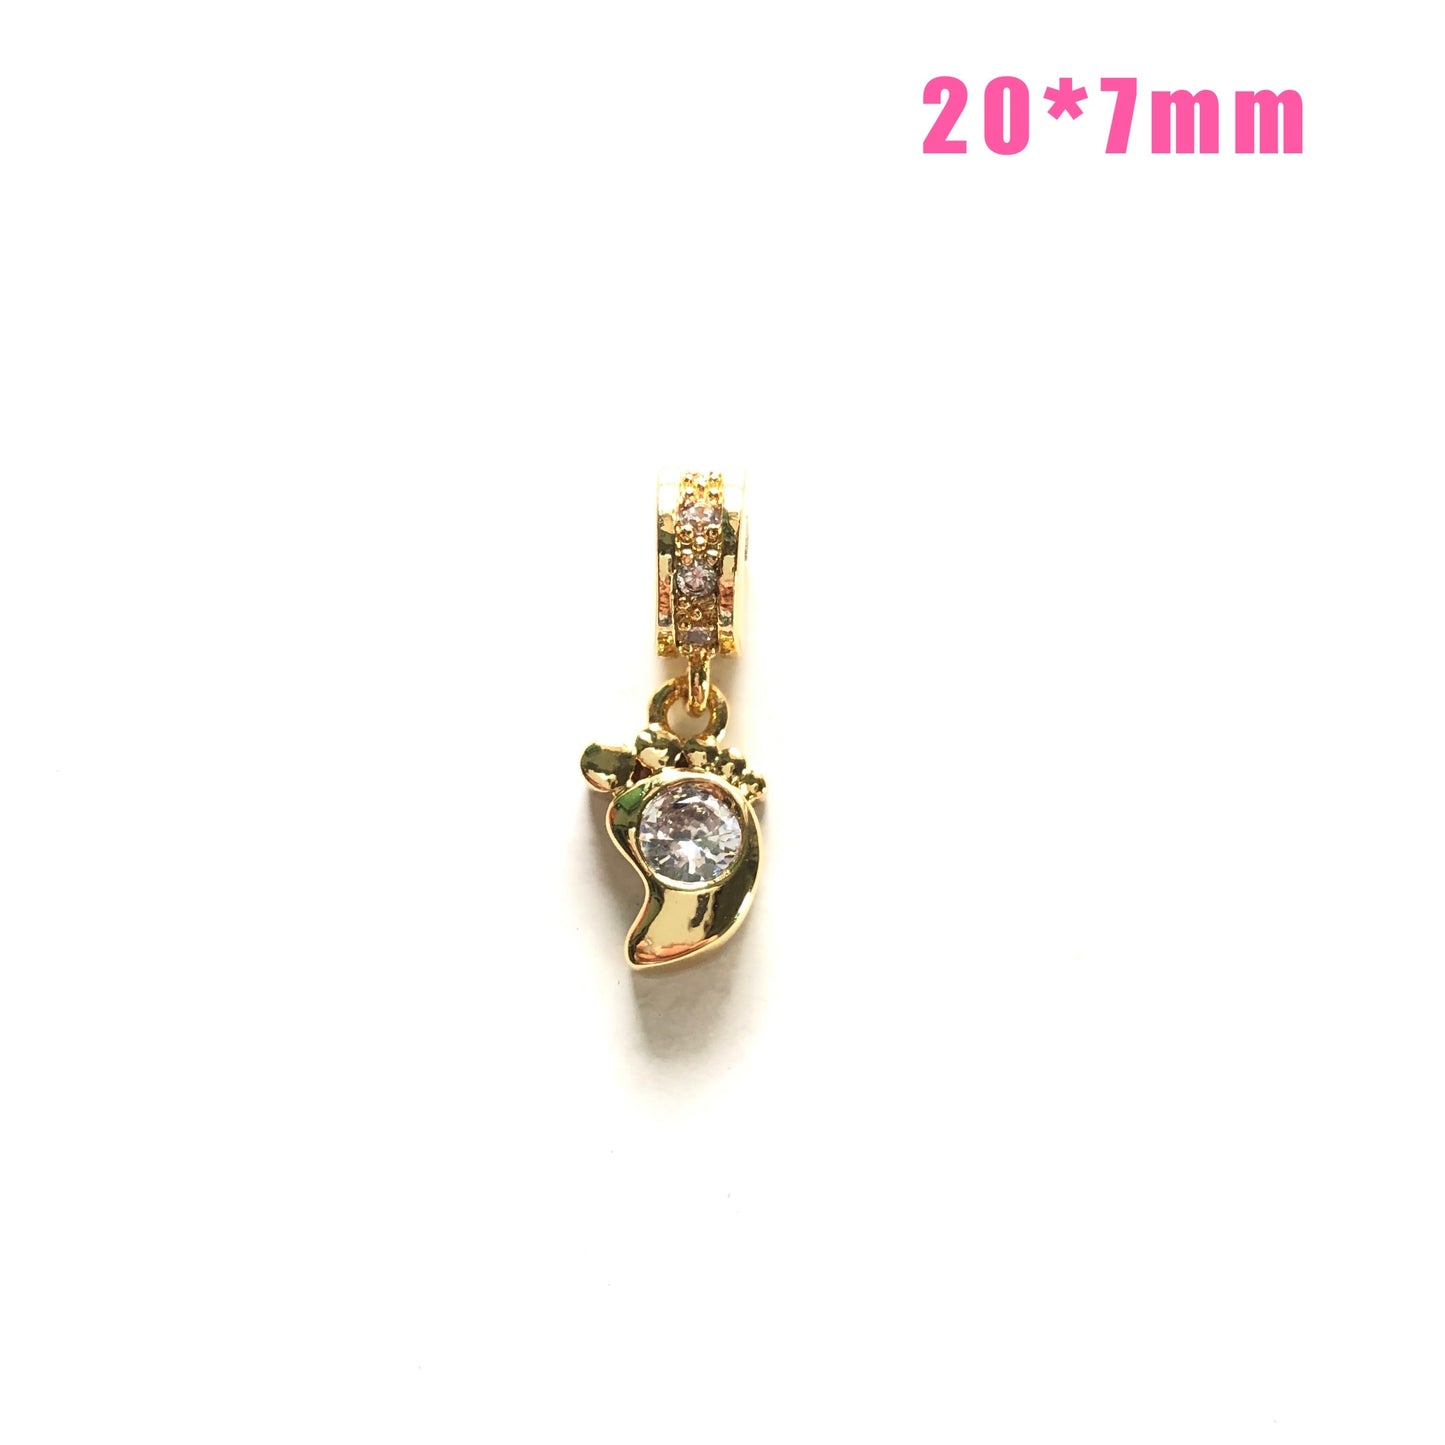 10pcs/lot Small Size CZ Paved Butterfly, Eye, Heart, Cross, Star, Moon Charms Foot CZ Paved Charms Small Sizes Charms Beads Beyond